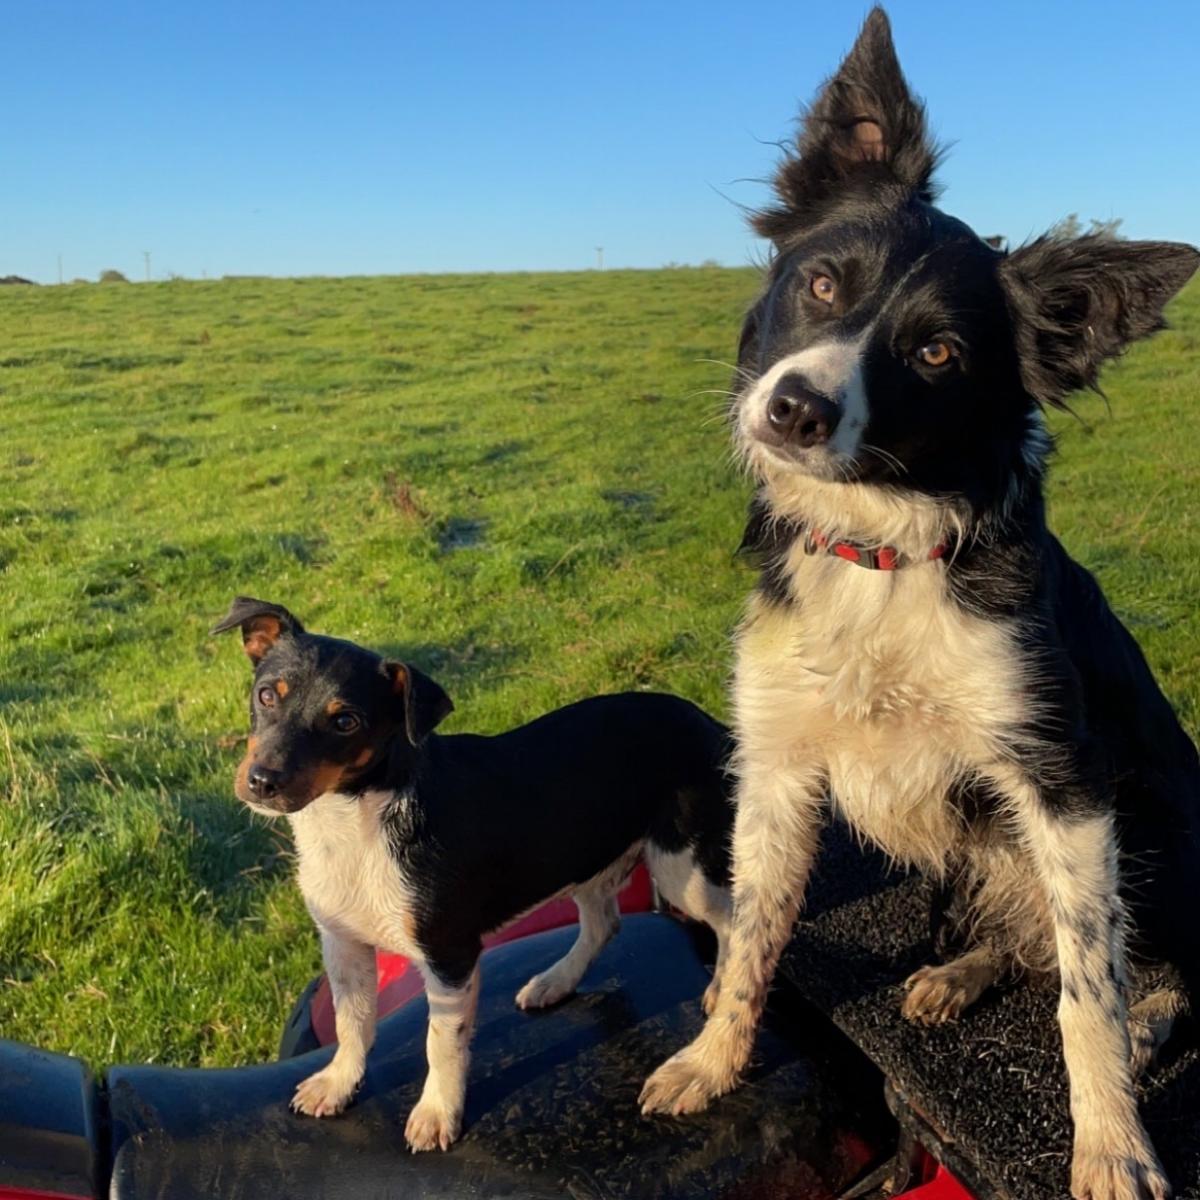 Stewart Dunlop - My Collie pup, Flo, and her side kick Alfie the Jack Russell